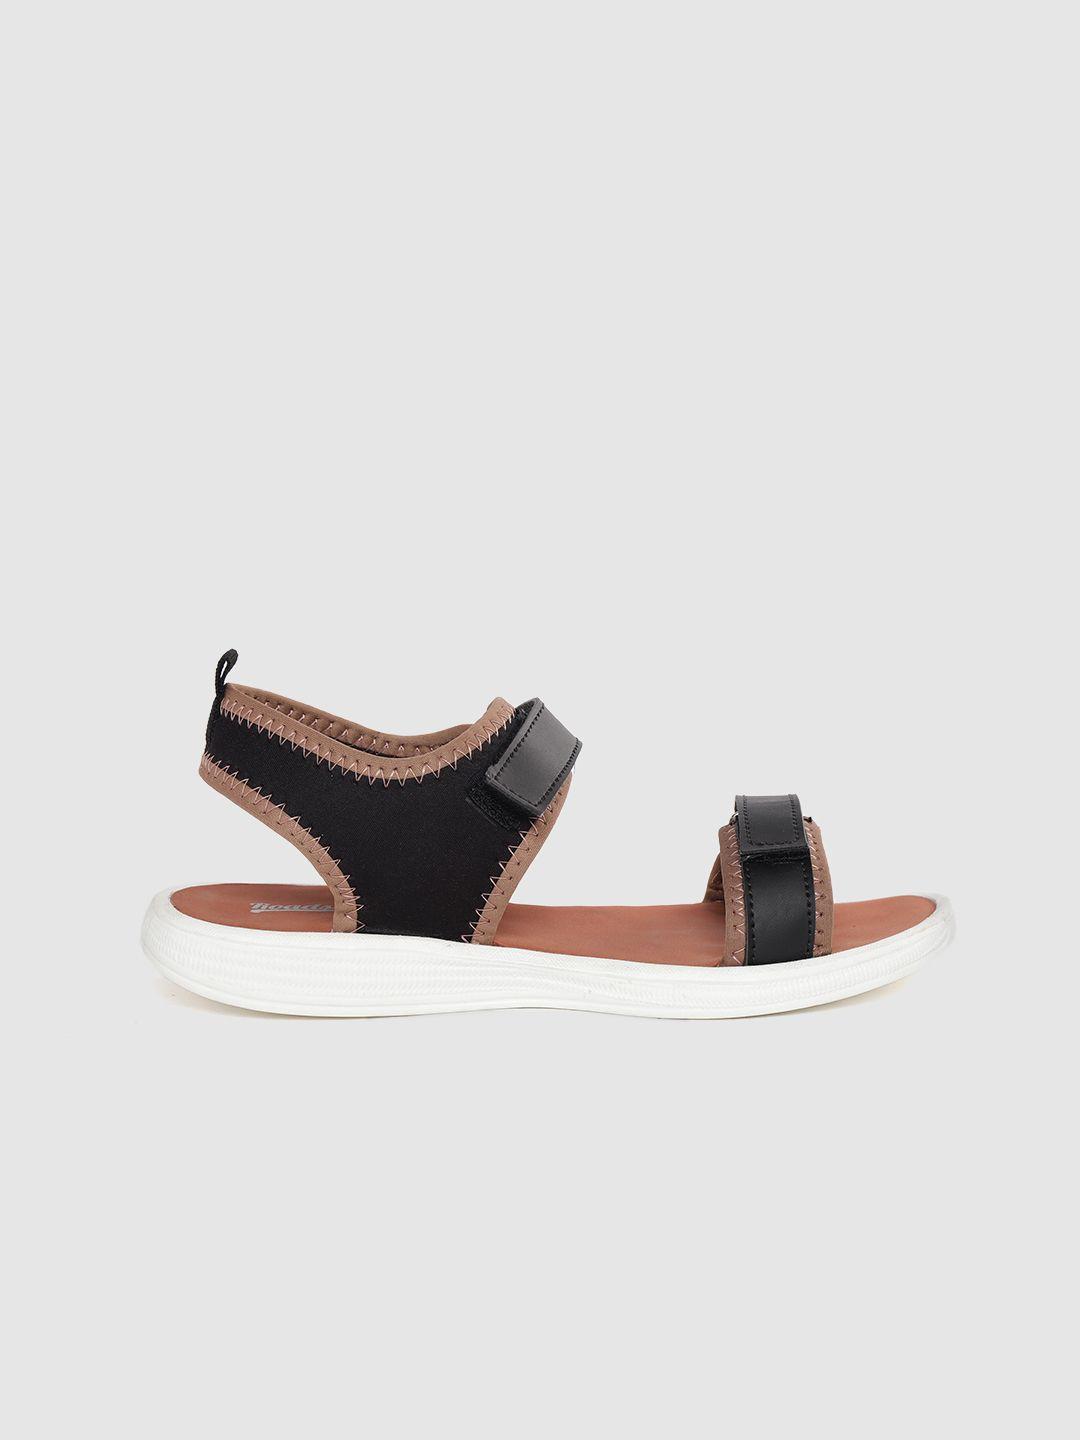 the-roadster-lifestyle-co-women-black-&-brown-sports-sandals